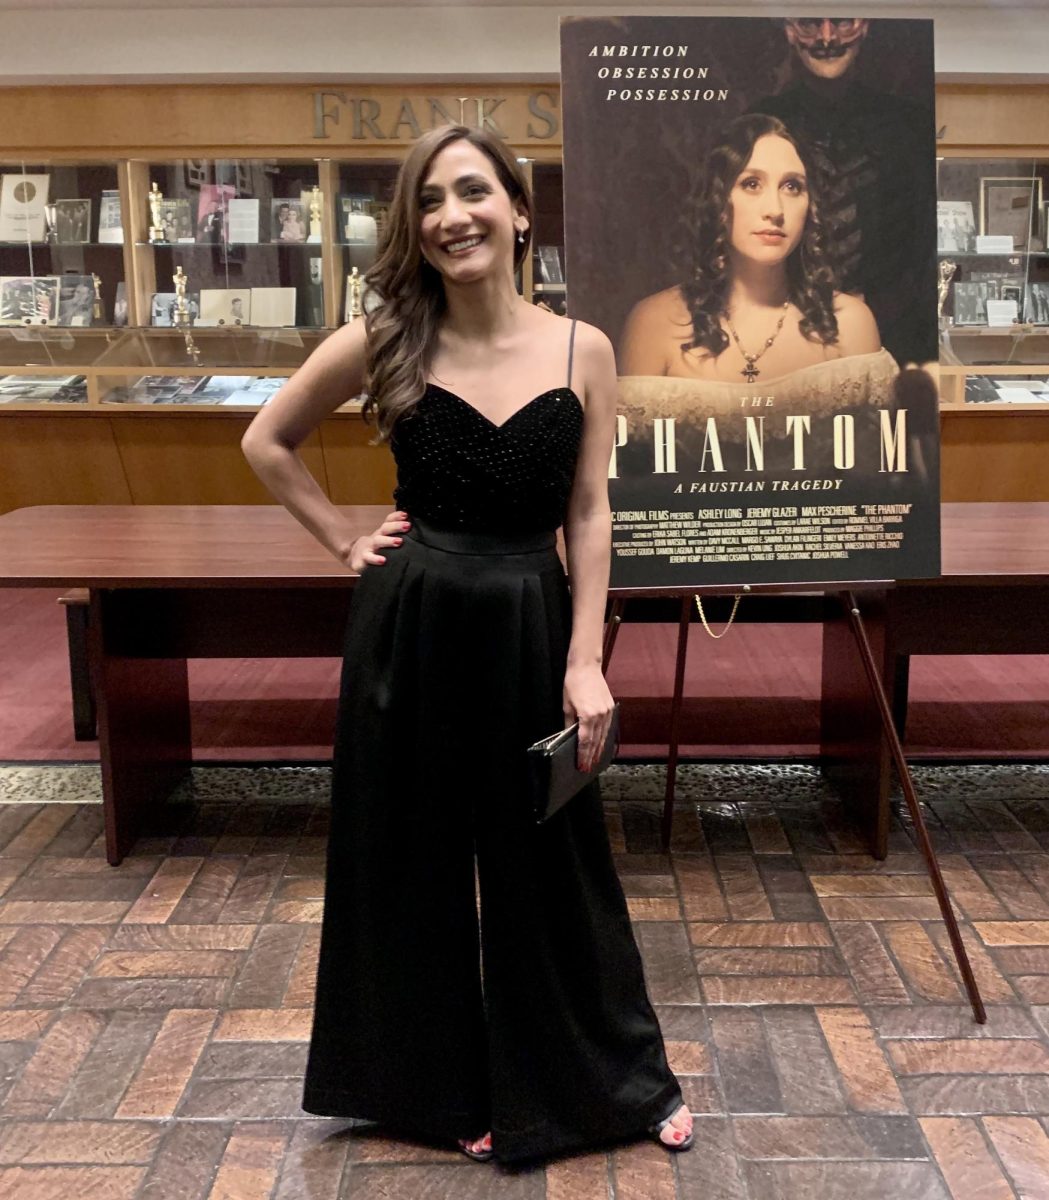 Rachel Silveria attends the premiere of The Phantom at the Eileen Norris Theatre of the University of Southern California on Sept. 30. 